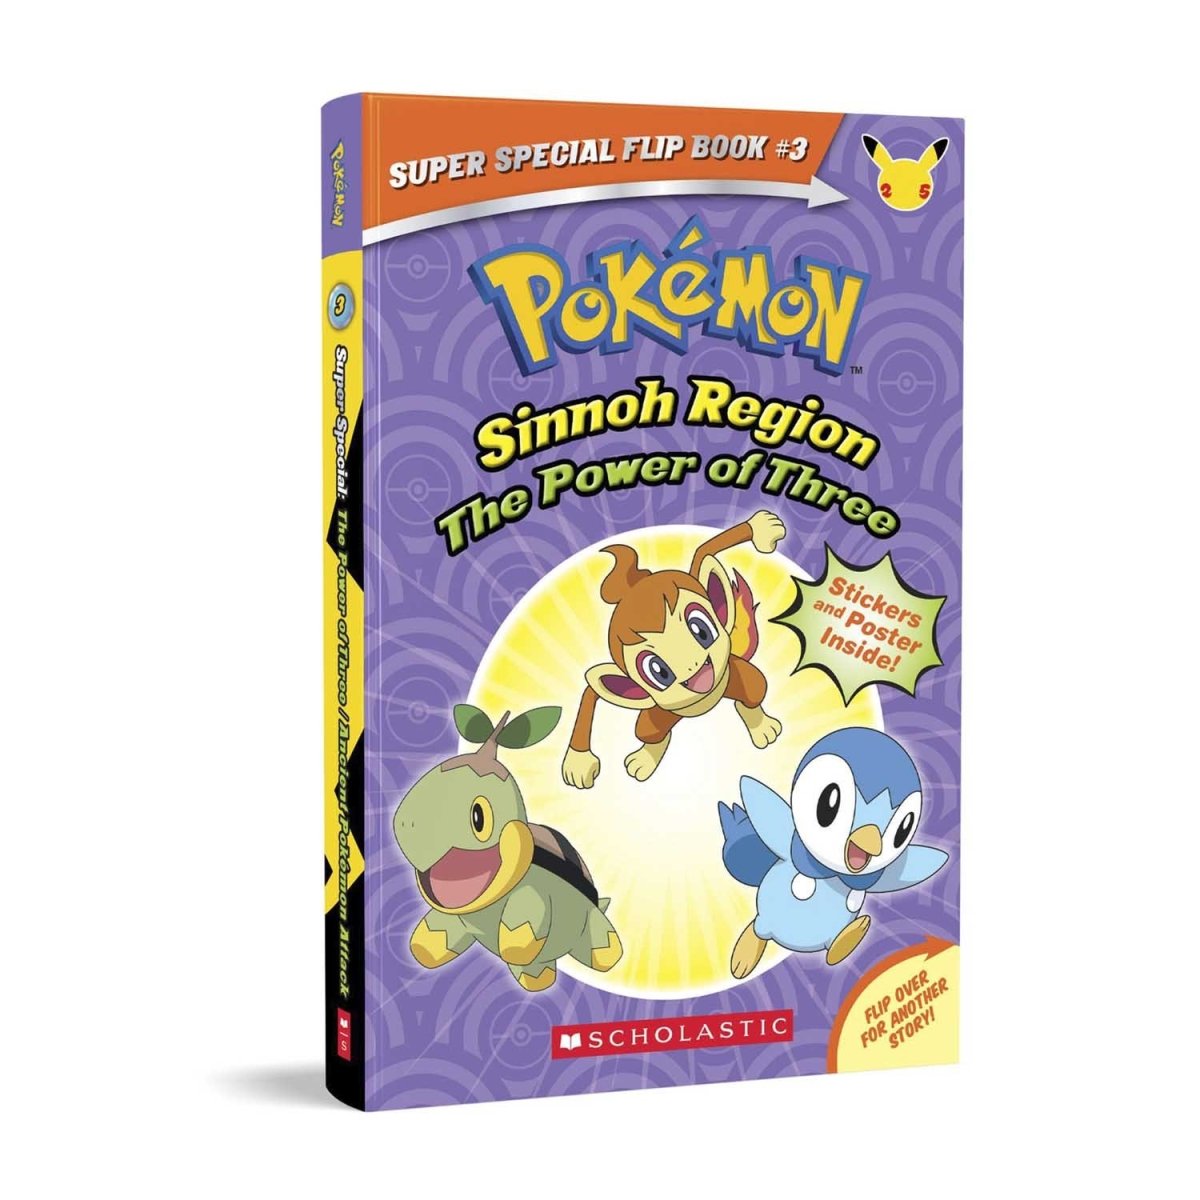 The slightly changed version of the Sinnoh region Pokedex used in